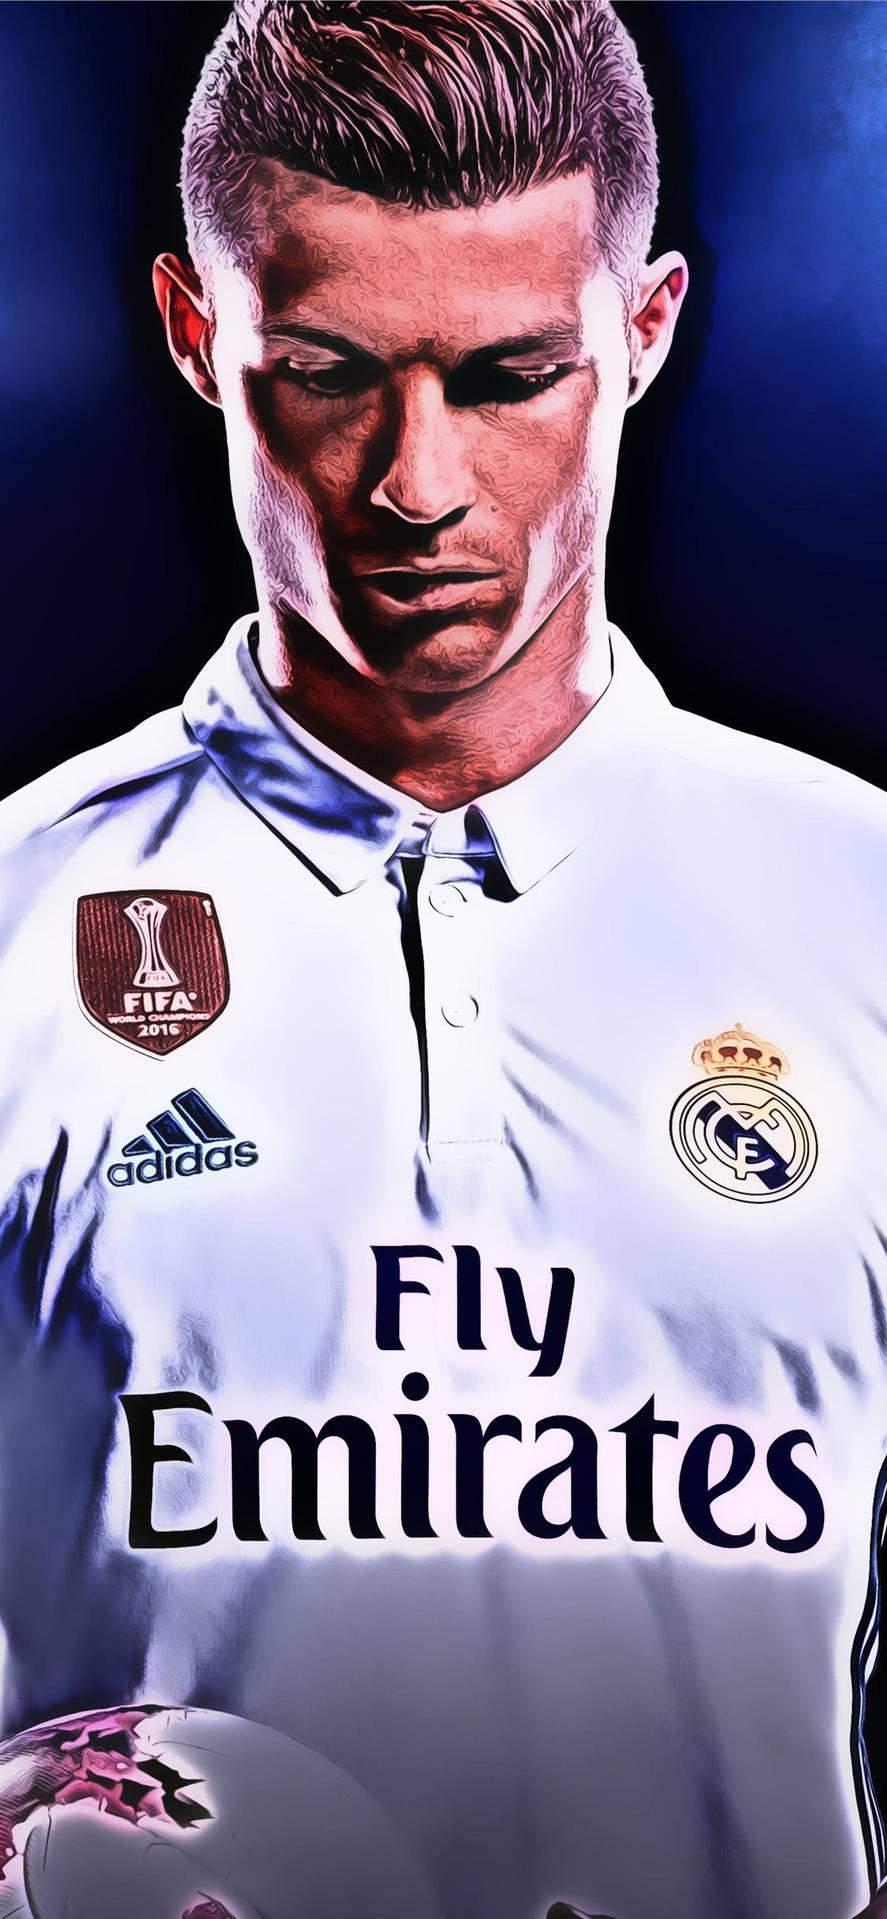 Download Real Madrid Fly Emirates Ronaldo iPhone Wallpaper